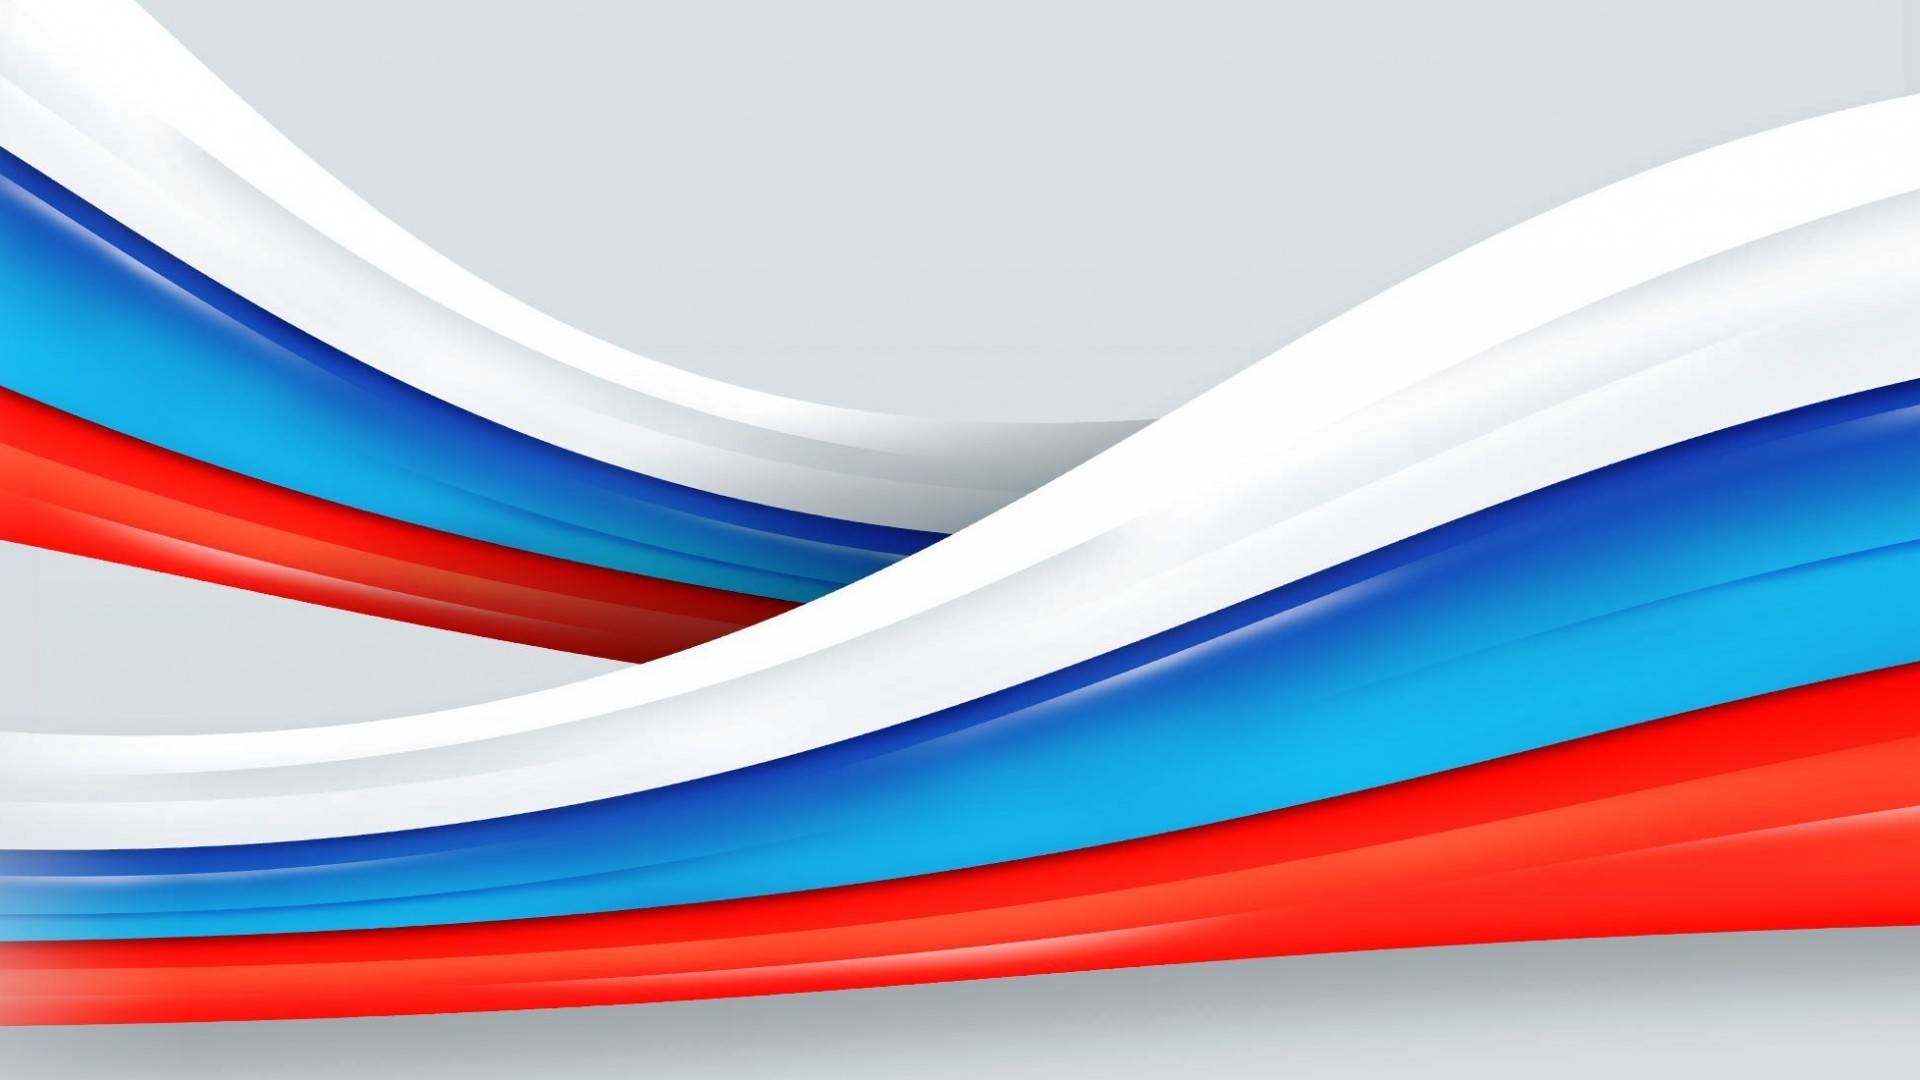 Wallpapers canvas russian flag tricolor on the desktop